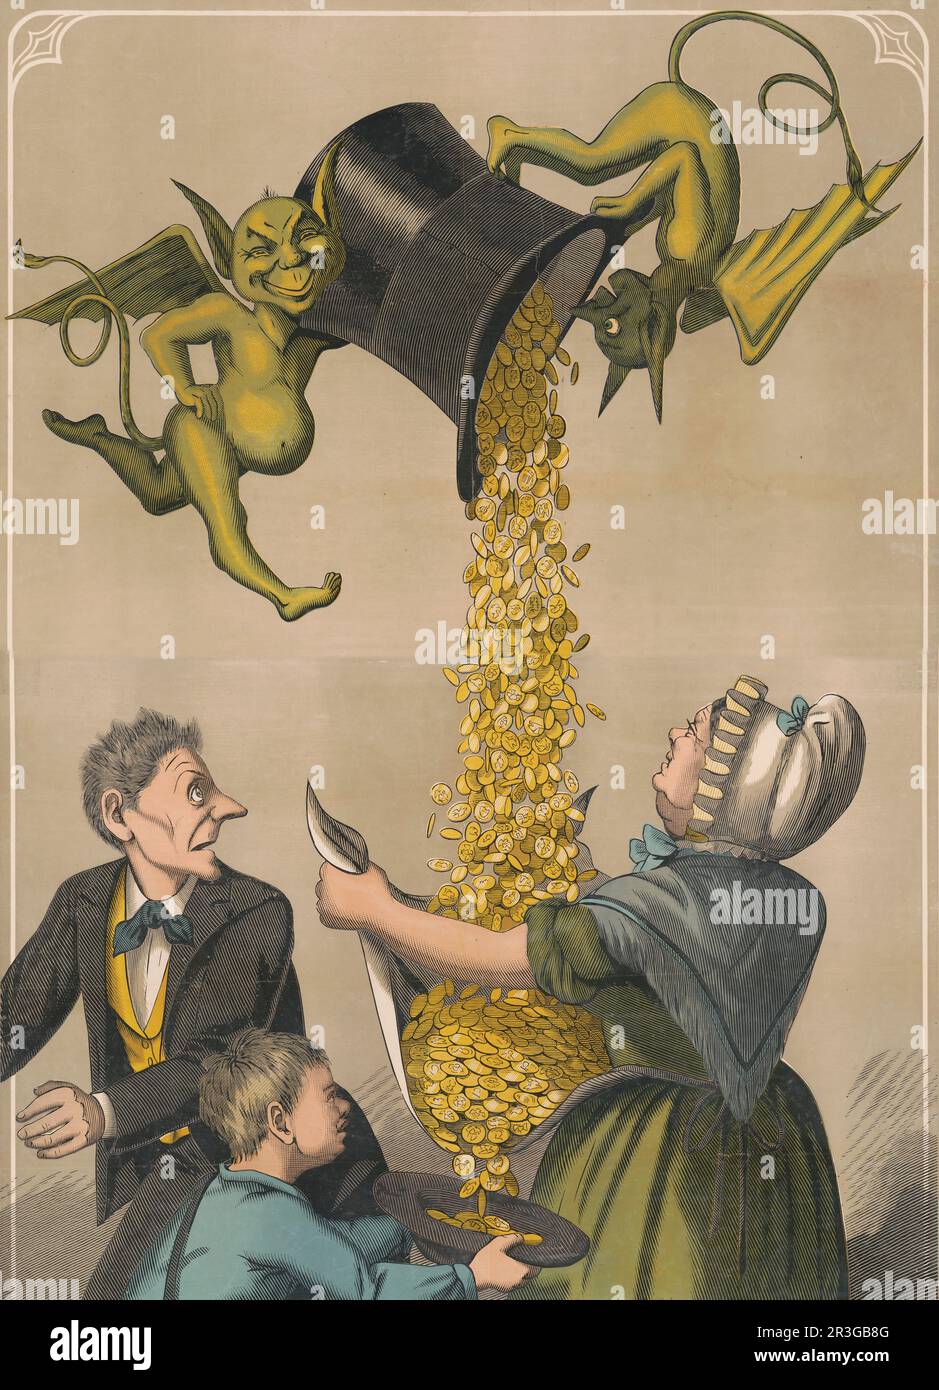 Devils pouring gold coins from hat into woman's apron and boy's hat, circa 1870. Stock Photo